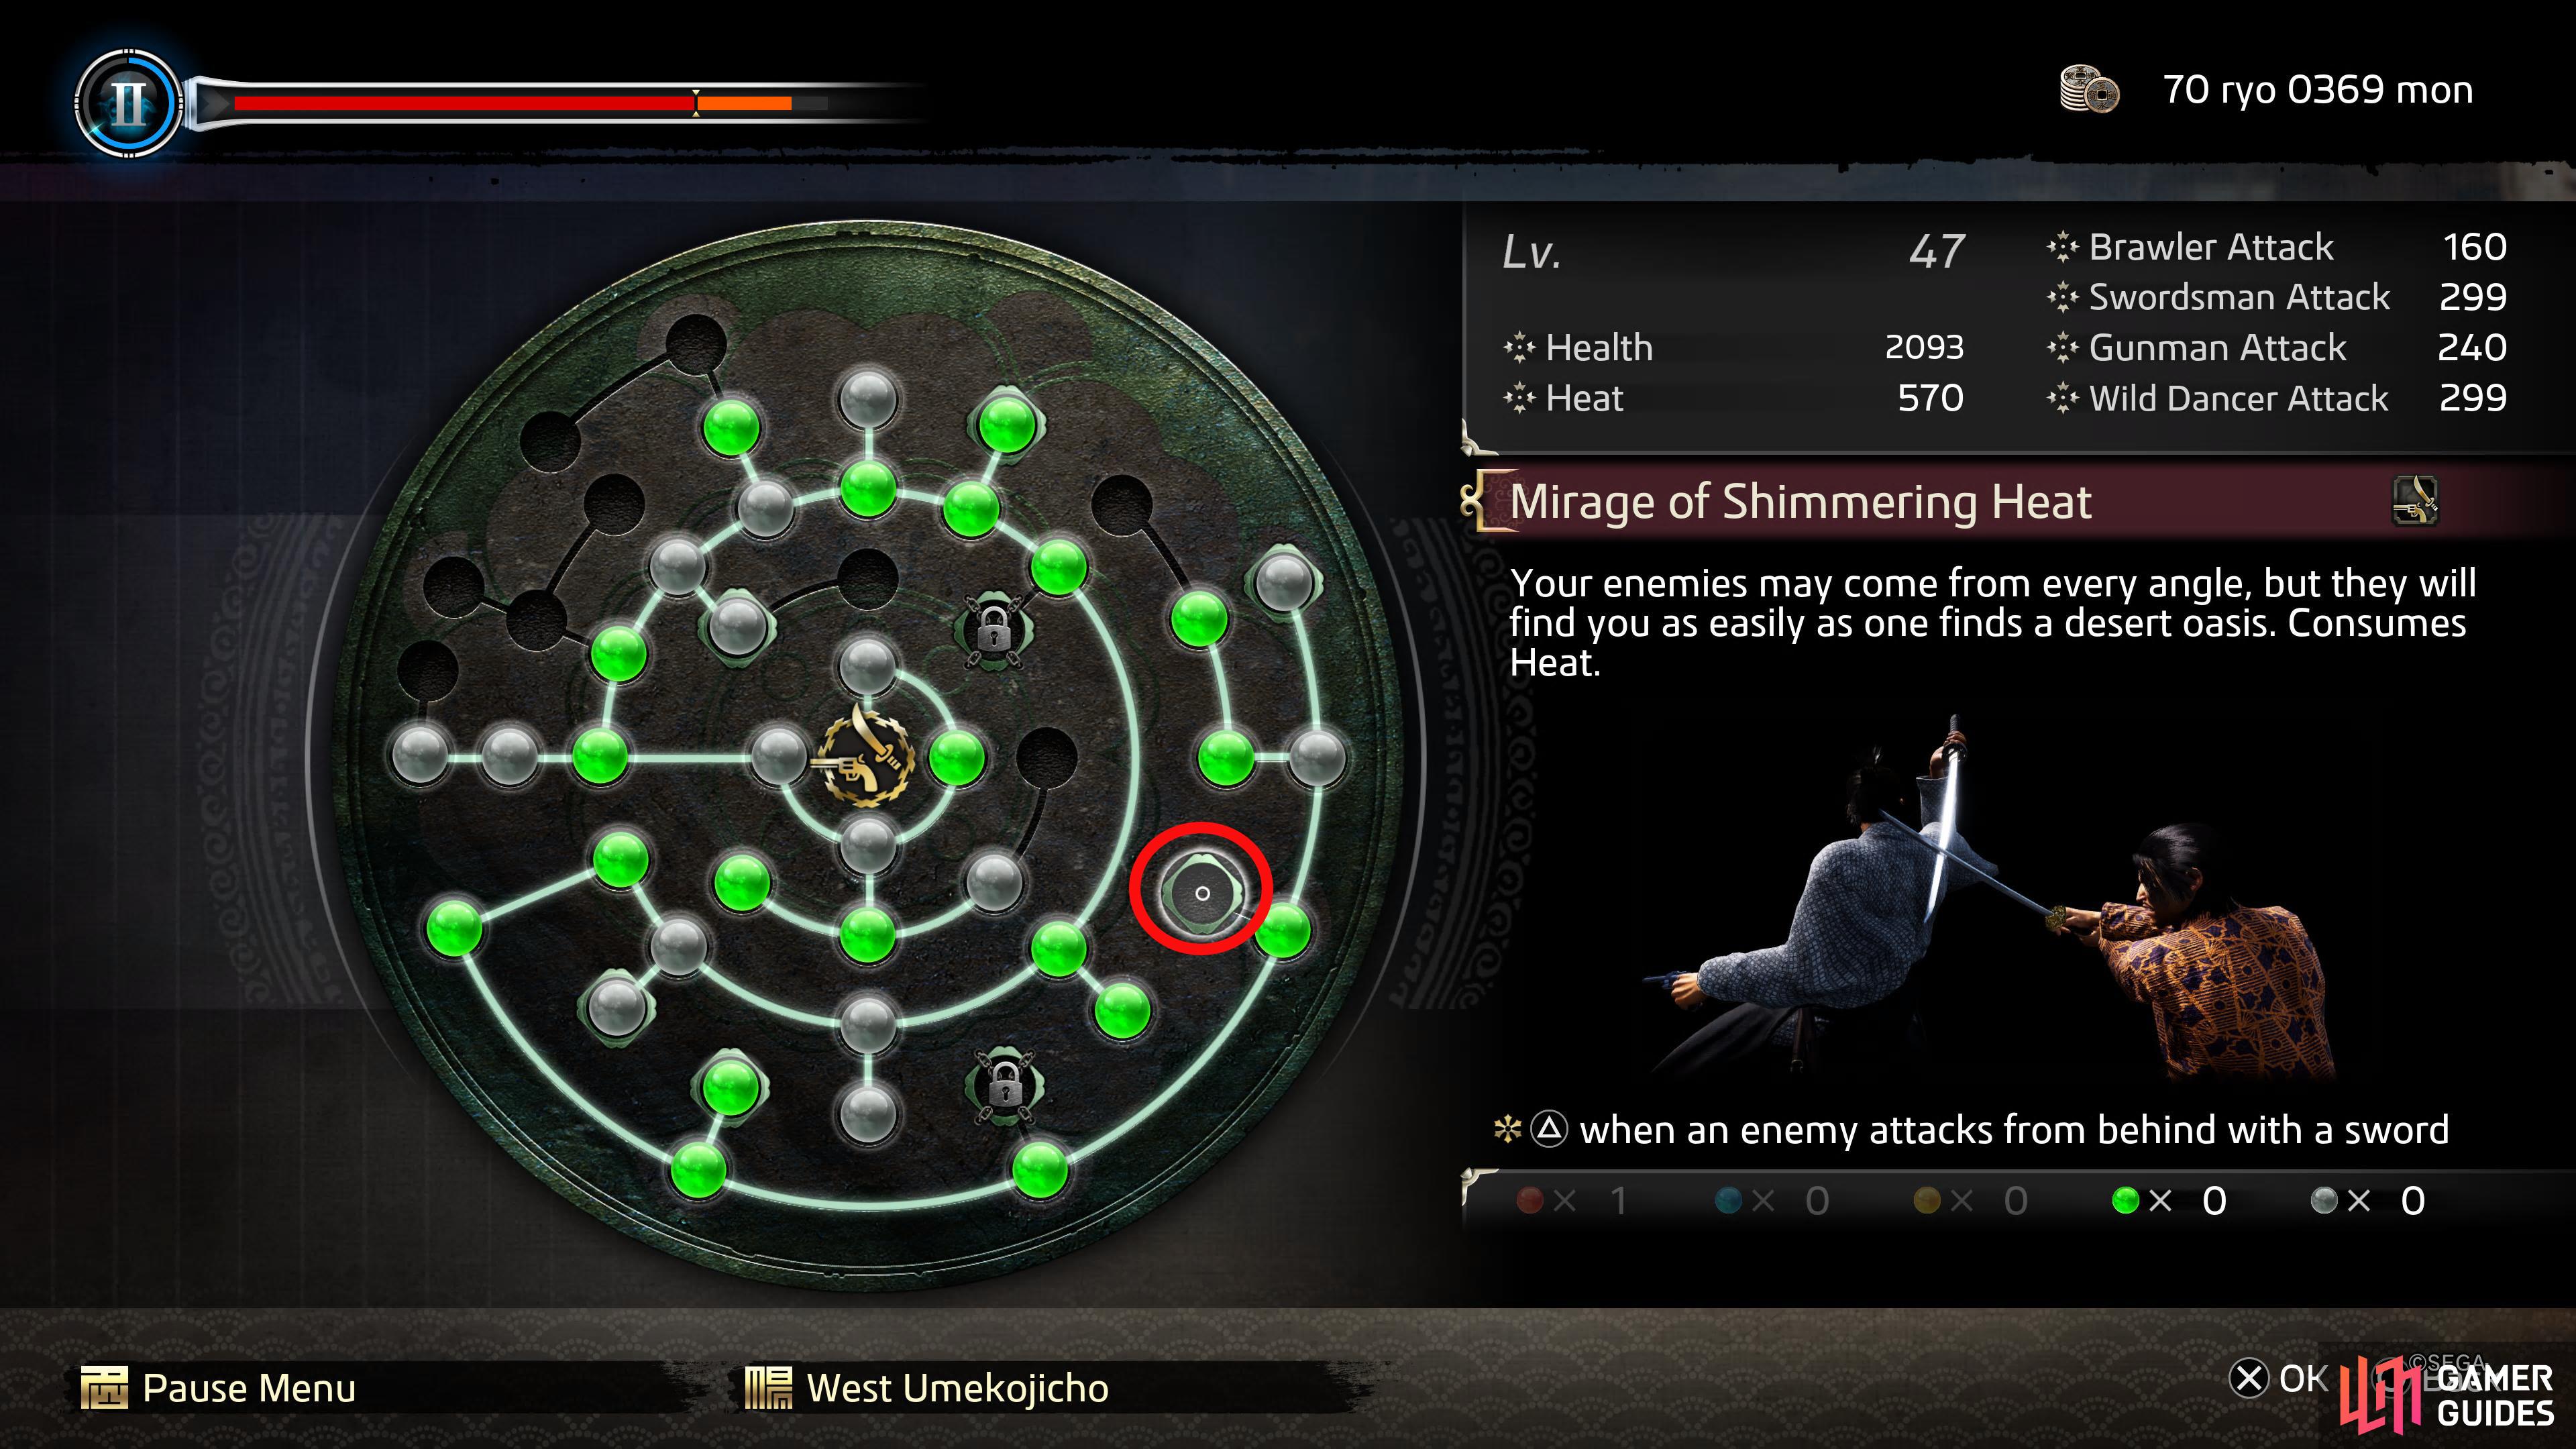 Here’s where Mirage of Shimmering Heat appears on the Ability Wheel.